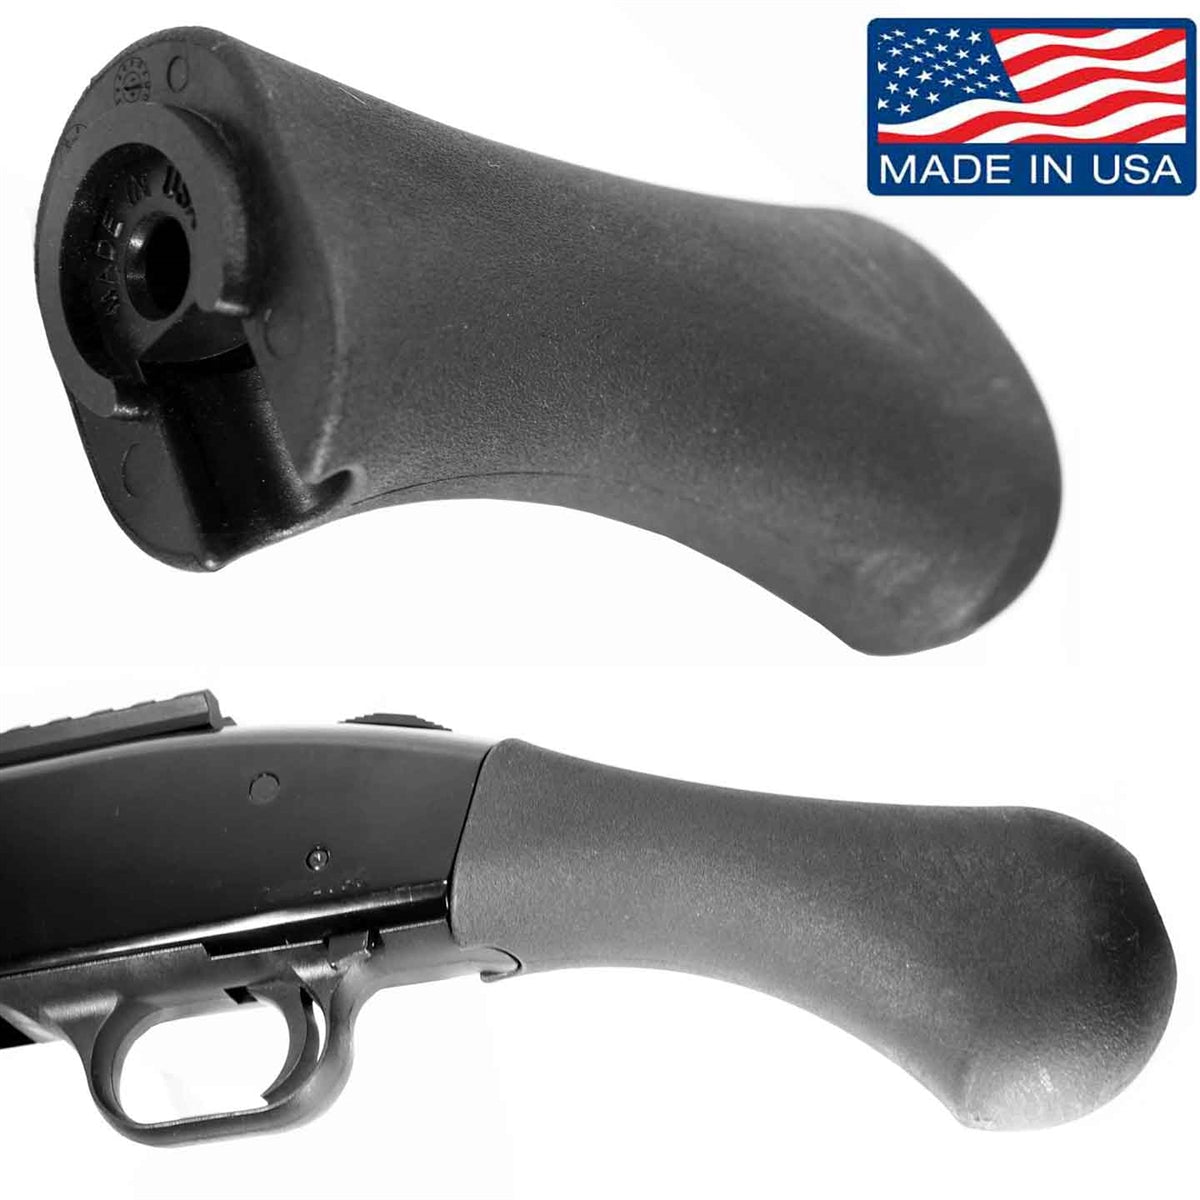 Mossberg 590 12 Gauge 20 Gauge Rear Grip Home Defense Tactical Hunting Accessory. - TRINITY SUPPLY INC